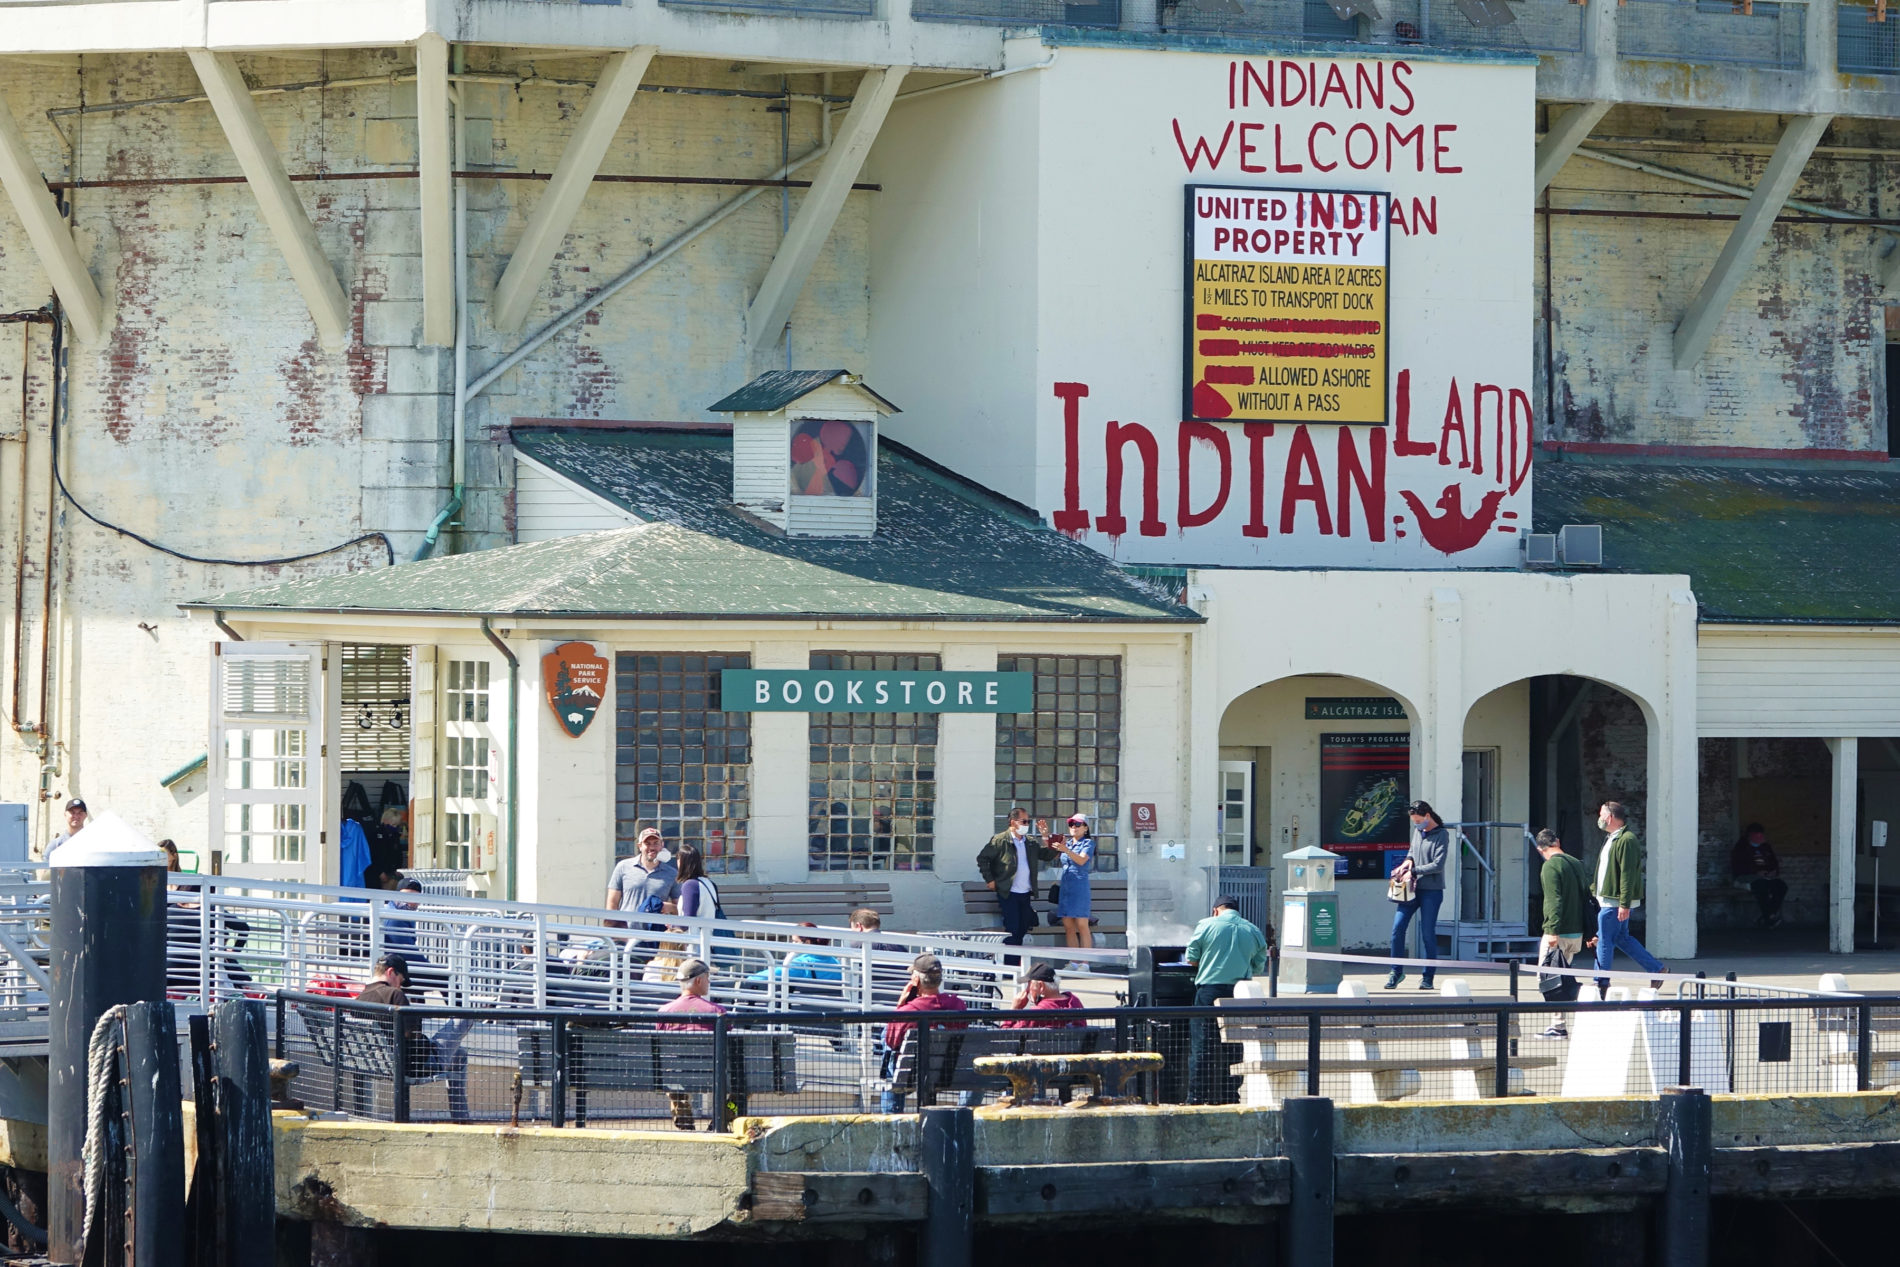 The dock and bookstore on Alcatraz with a red Indians Welcome sign. It’s a remnant left from the 1969 Indian Occupation.